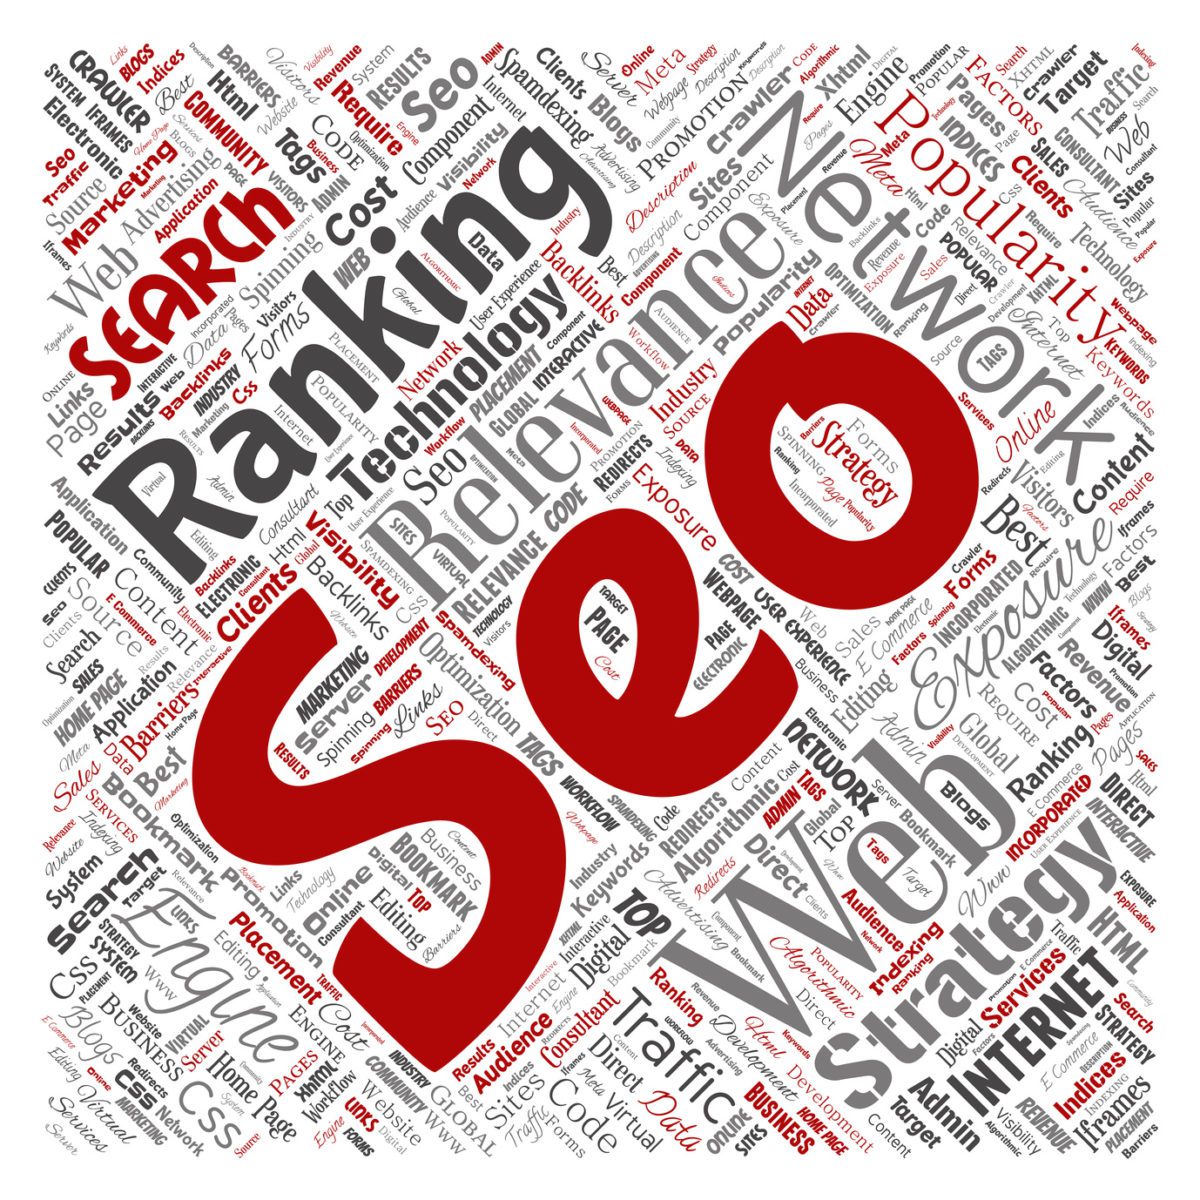 Are Any of These SEO Mistakes Hurting You?